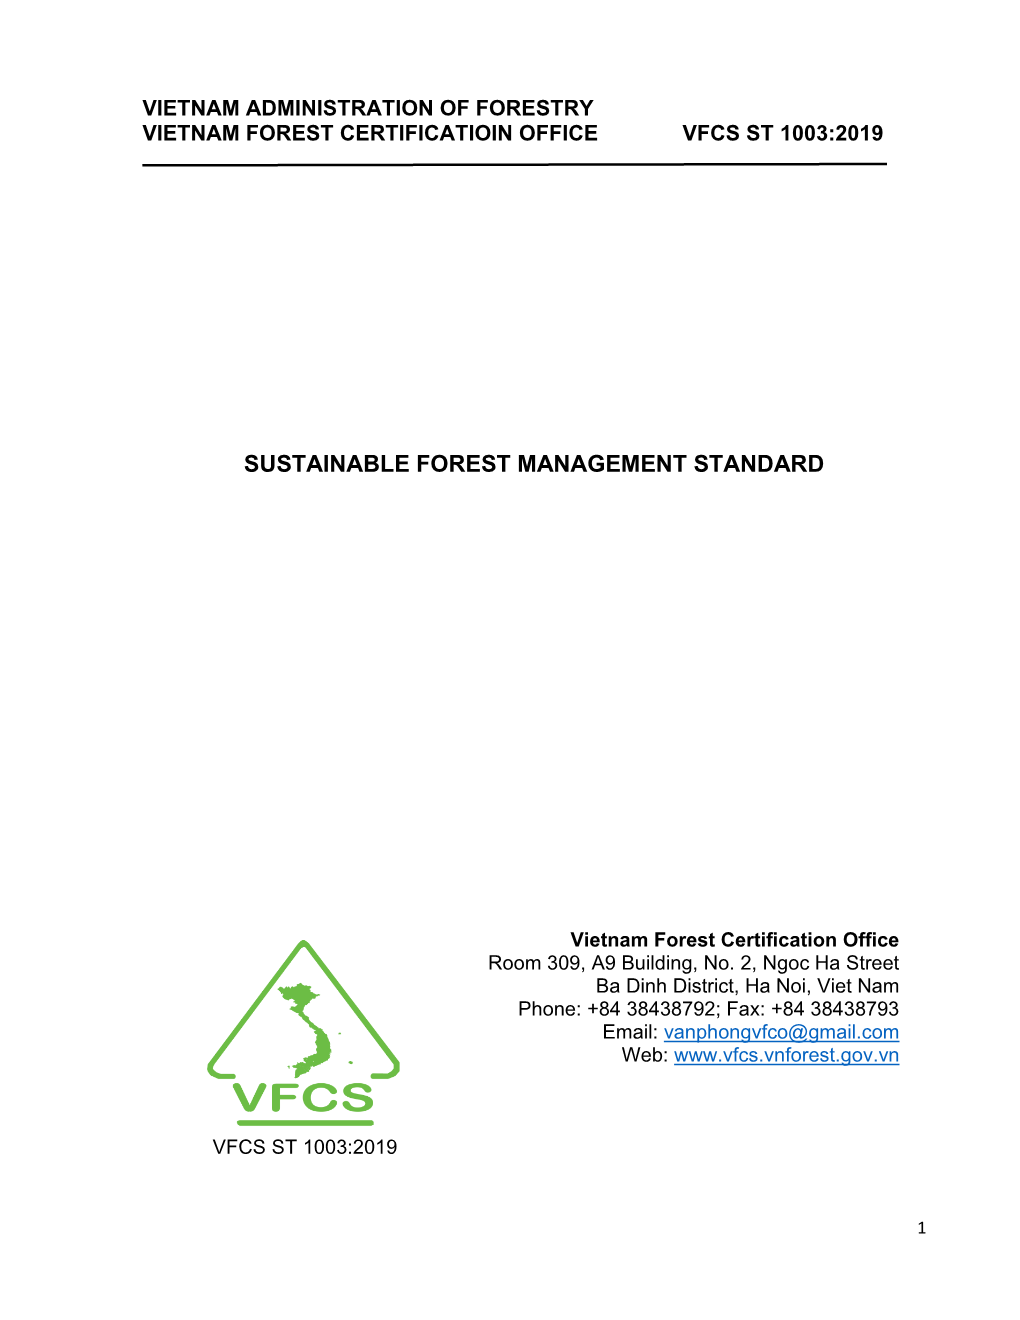 Sustainable Forest Management Standard